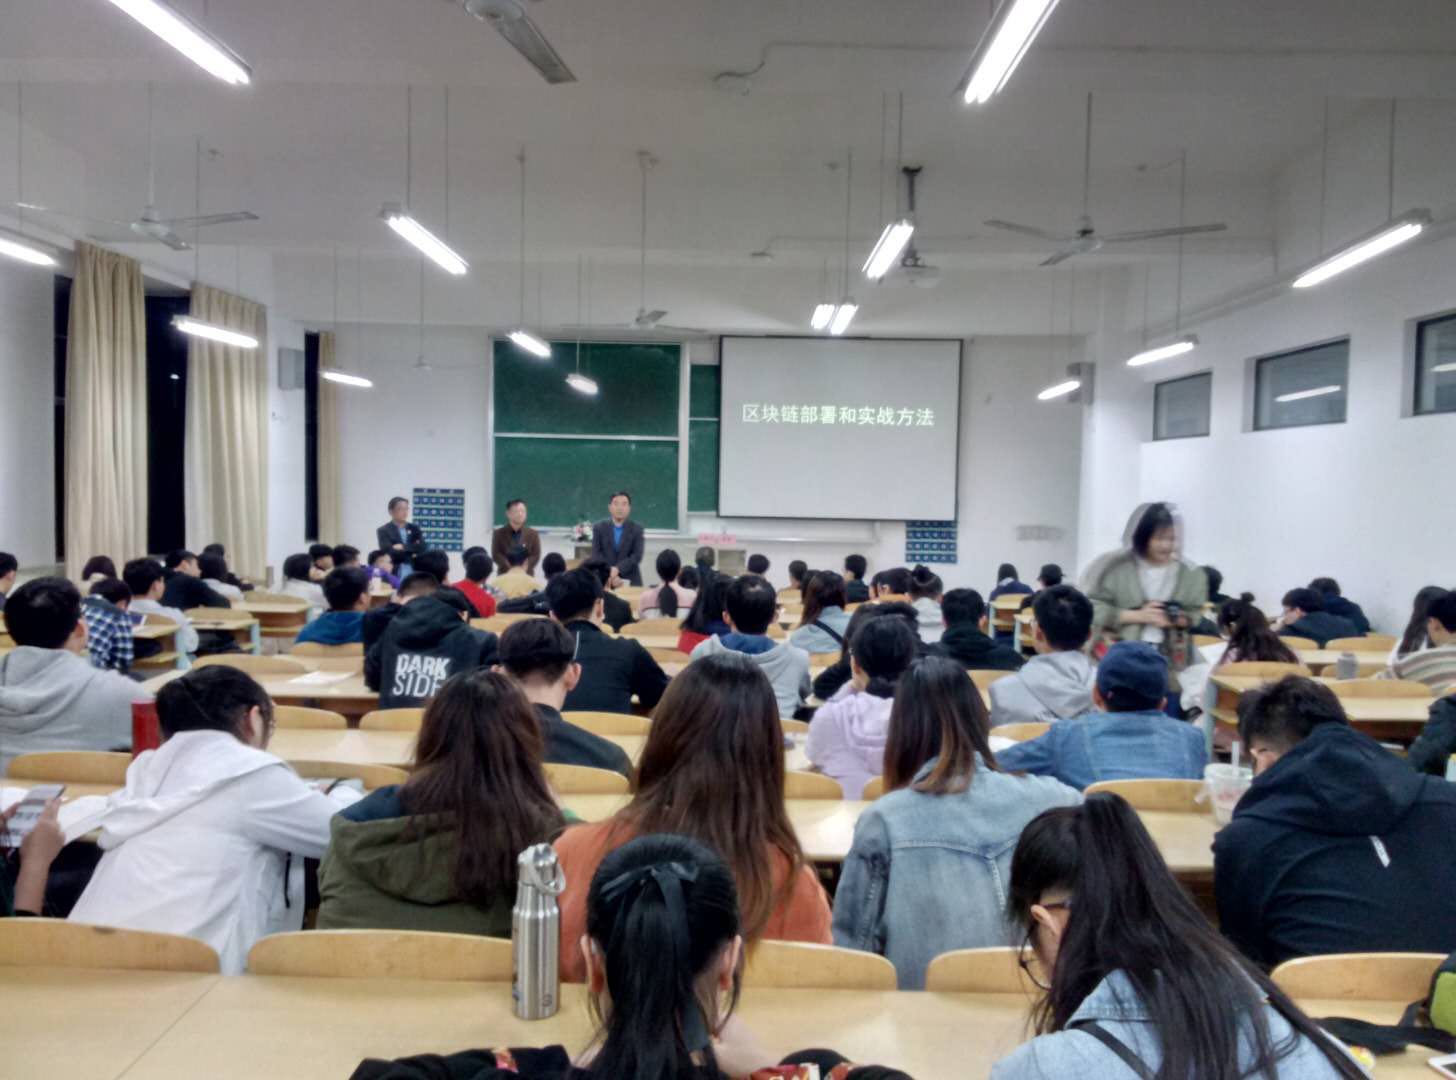 Dr. Peter Zhang and Dr. Ming Yang gave lecture on Blockchain in Shanghai Applied Technology University, Shanghai, China